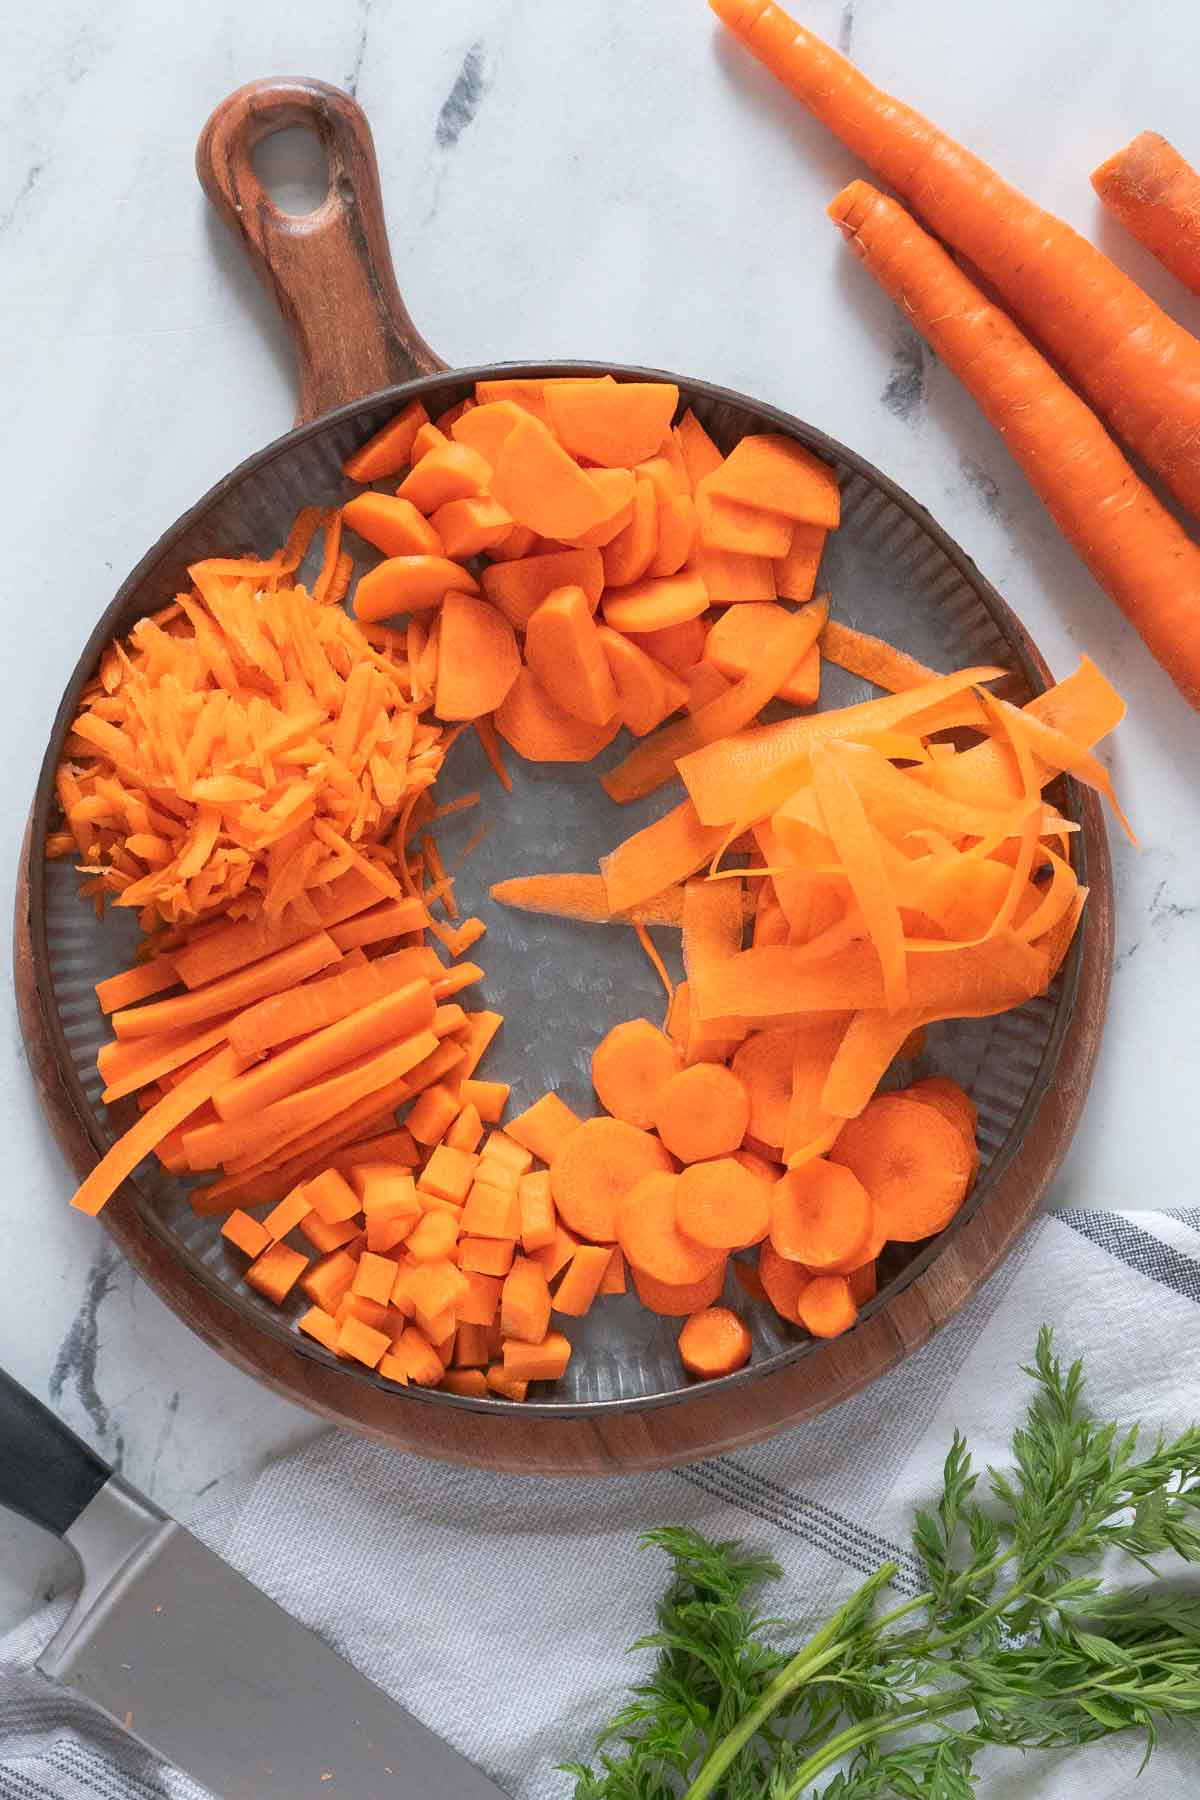 Carrots cut in different shapes on a plate.